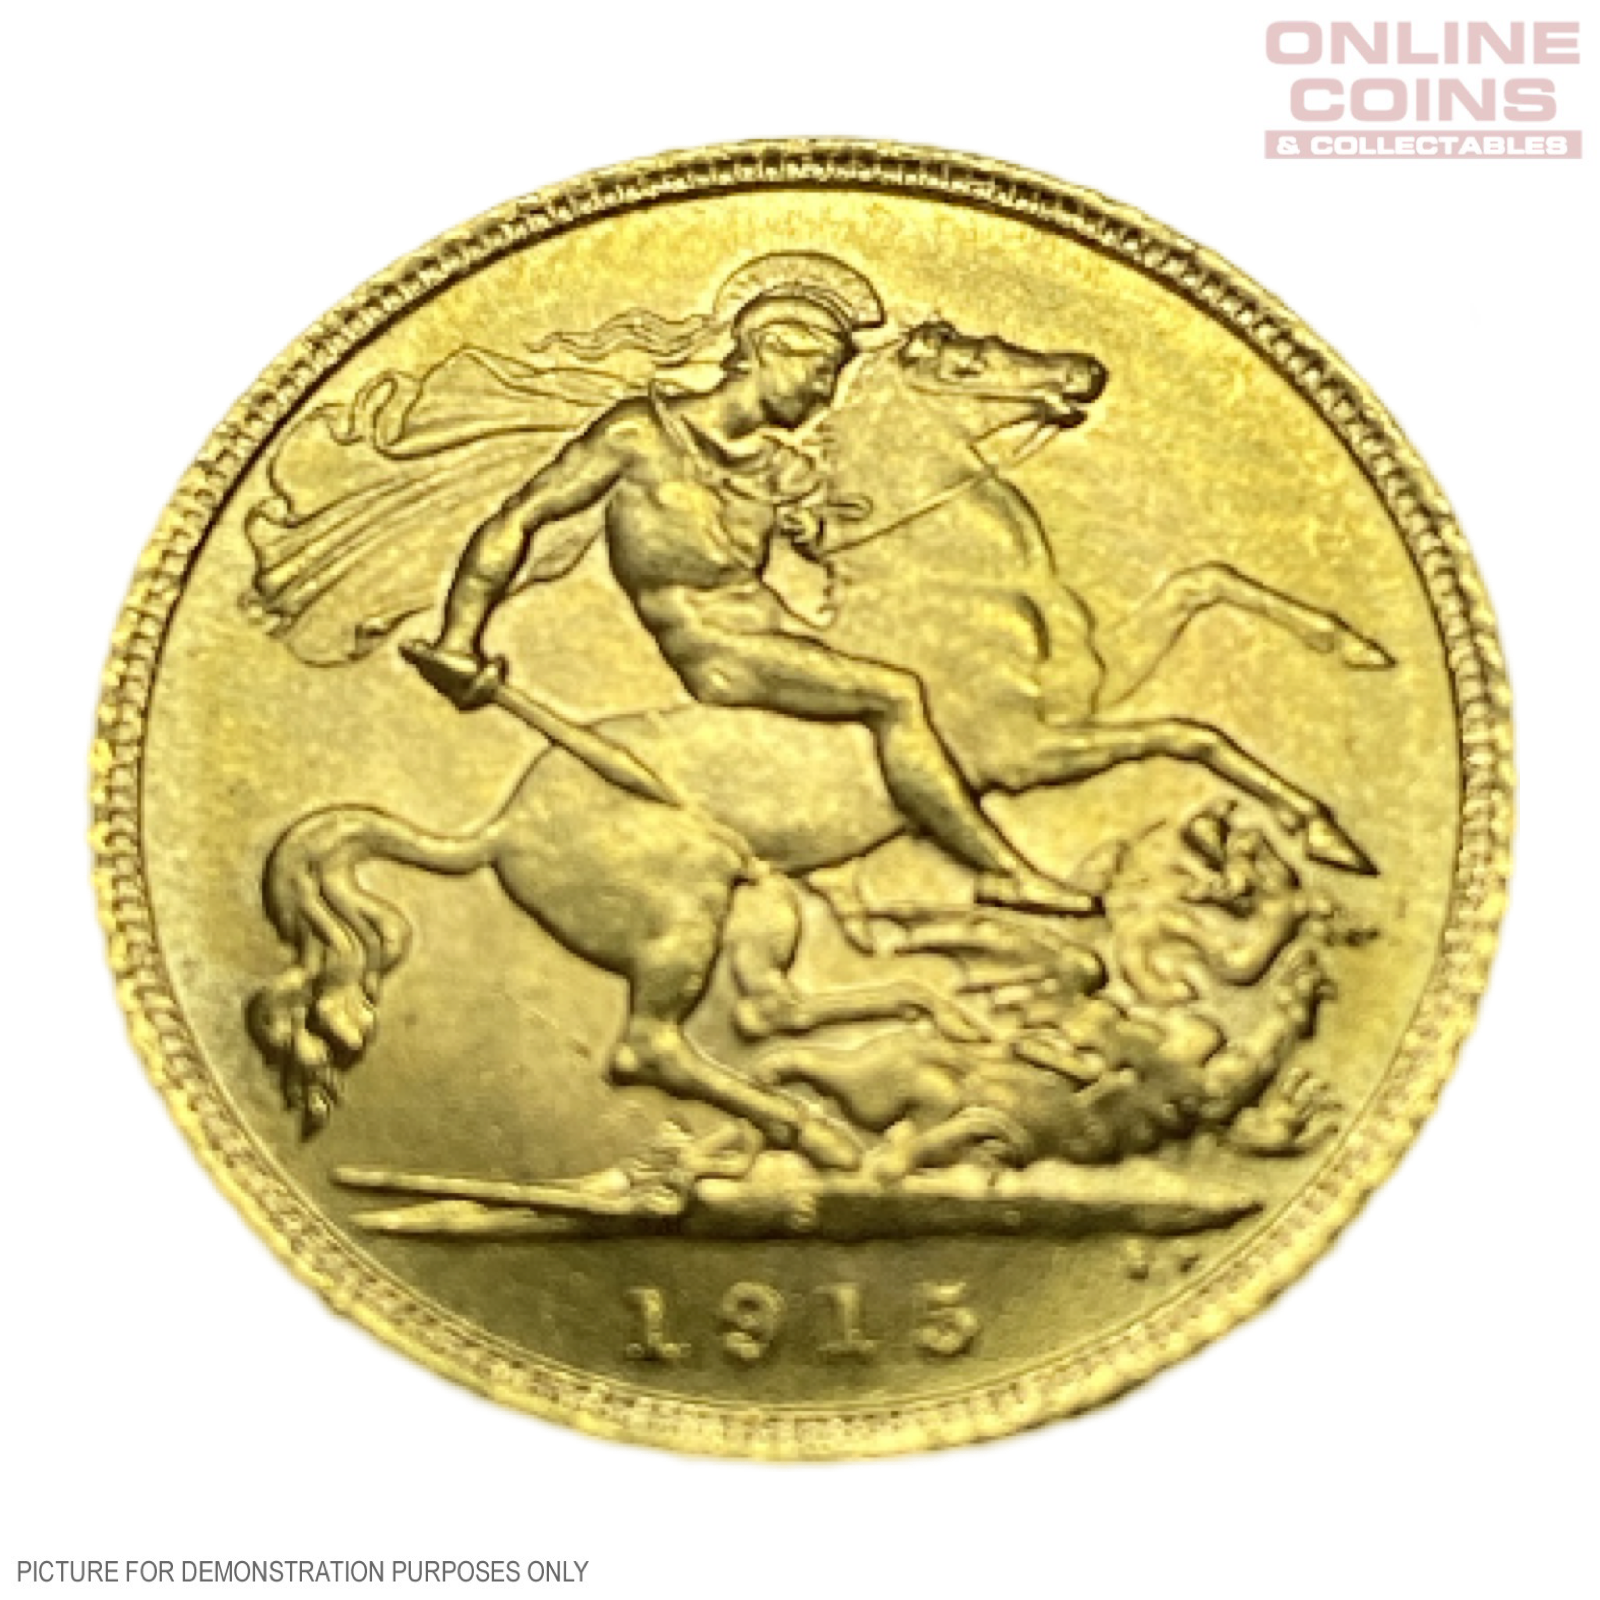 1915 Sydney Mint Half Sovereign - Almost Uncirculated